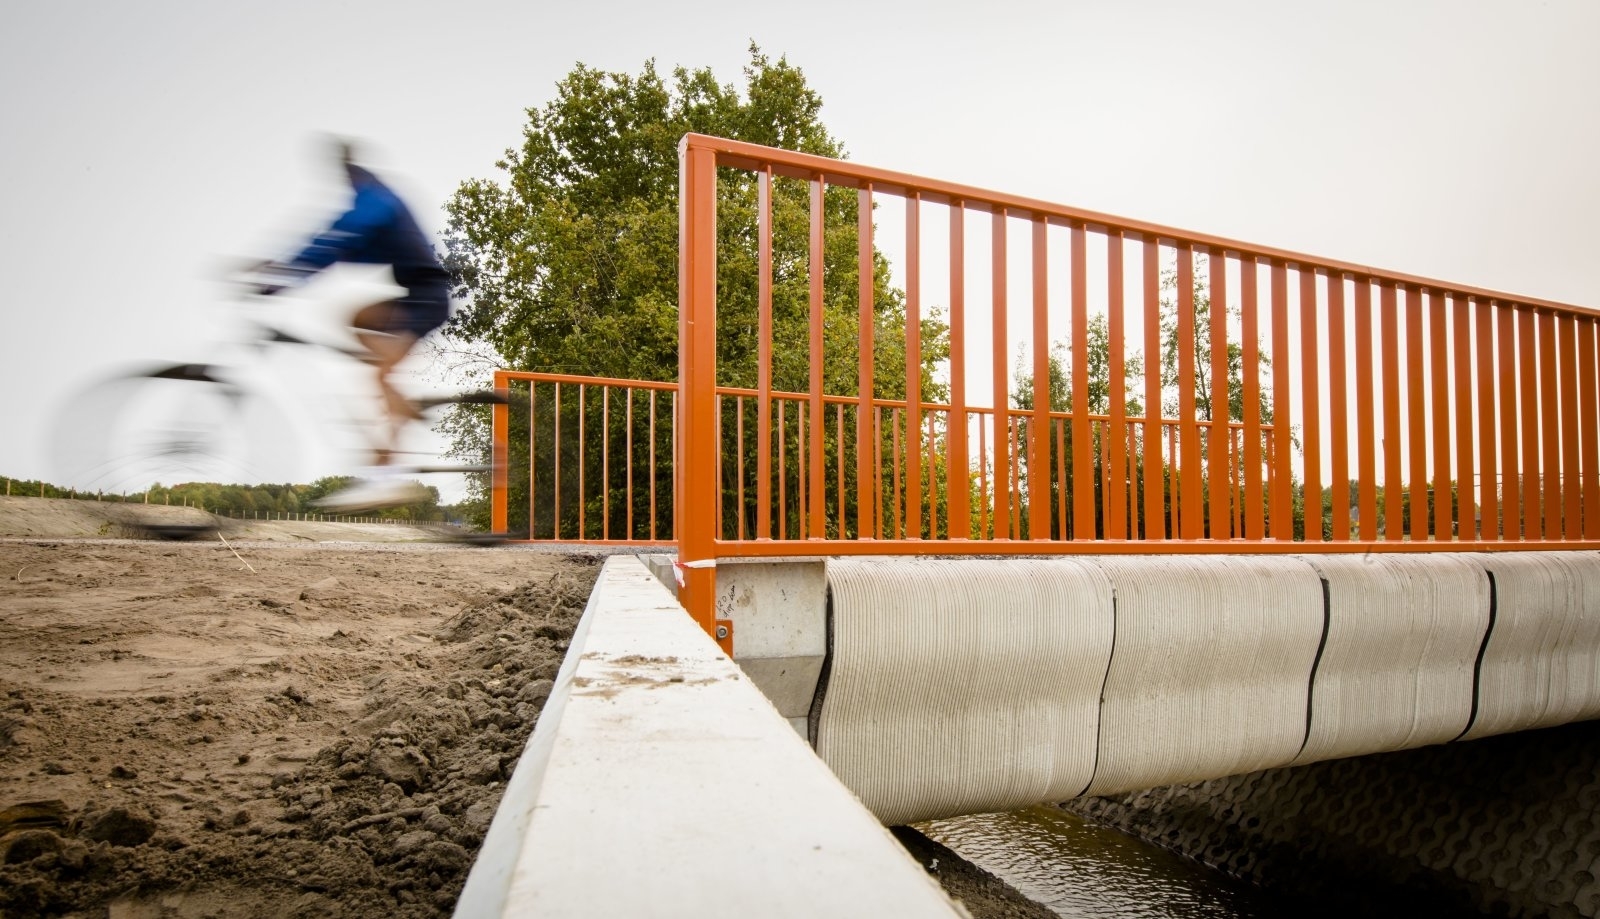 Dutch cyclists can ride over a 3D-printed bridge | DeviceDaily.com